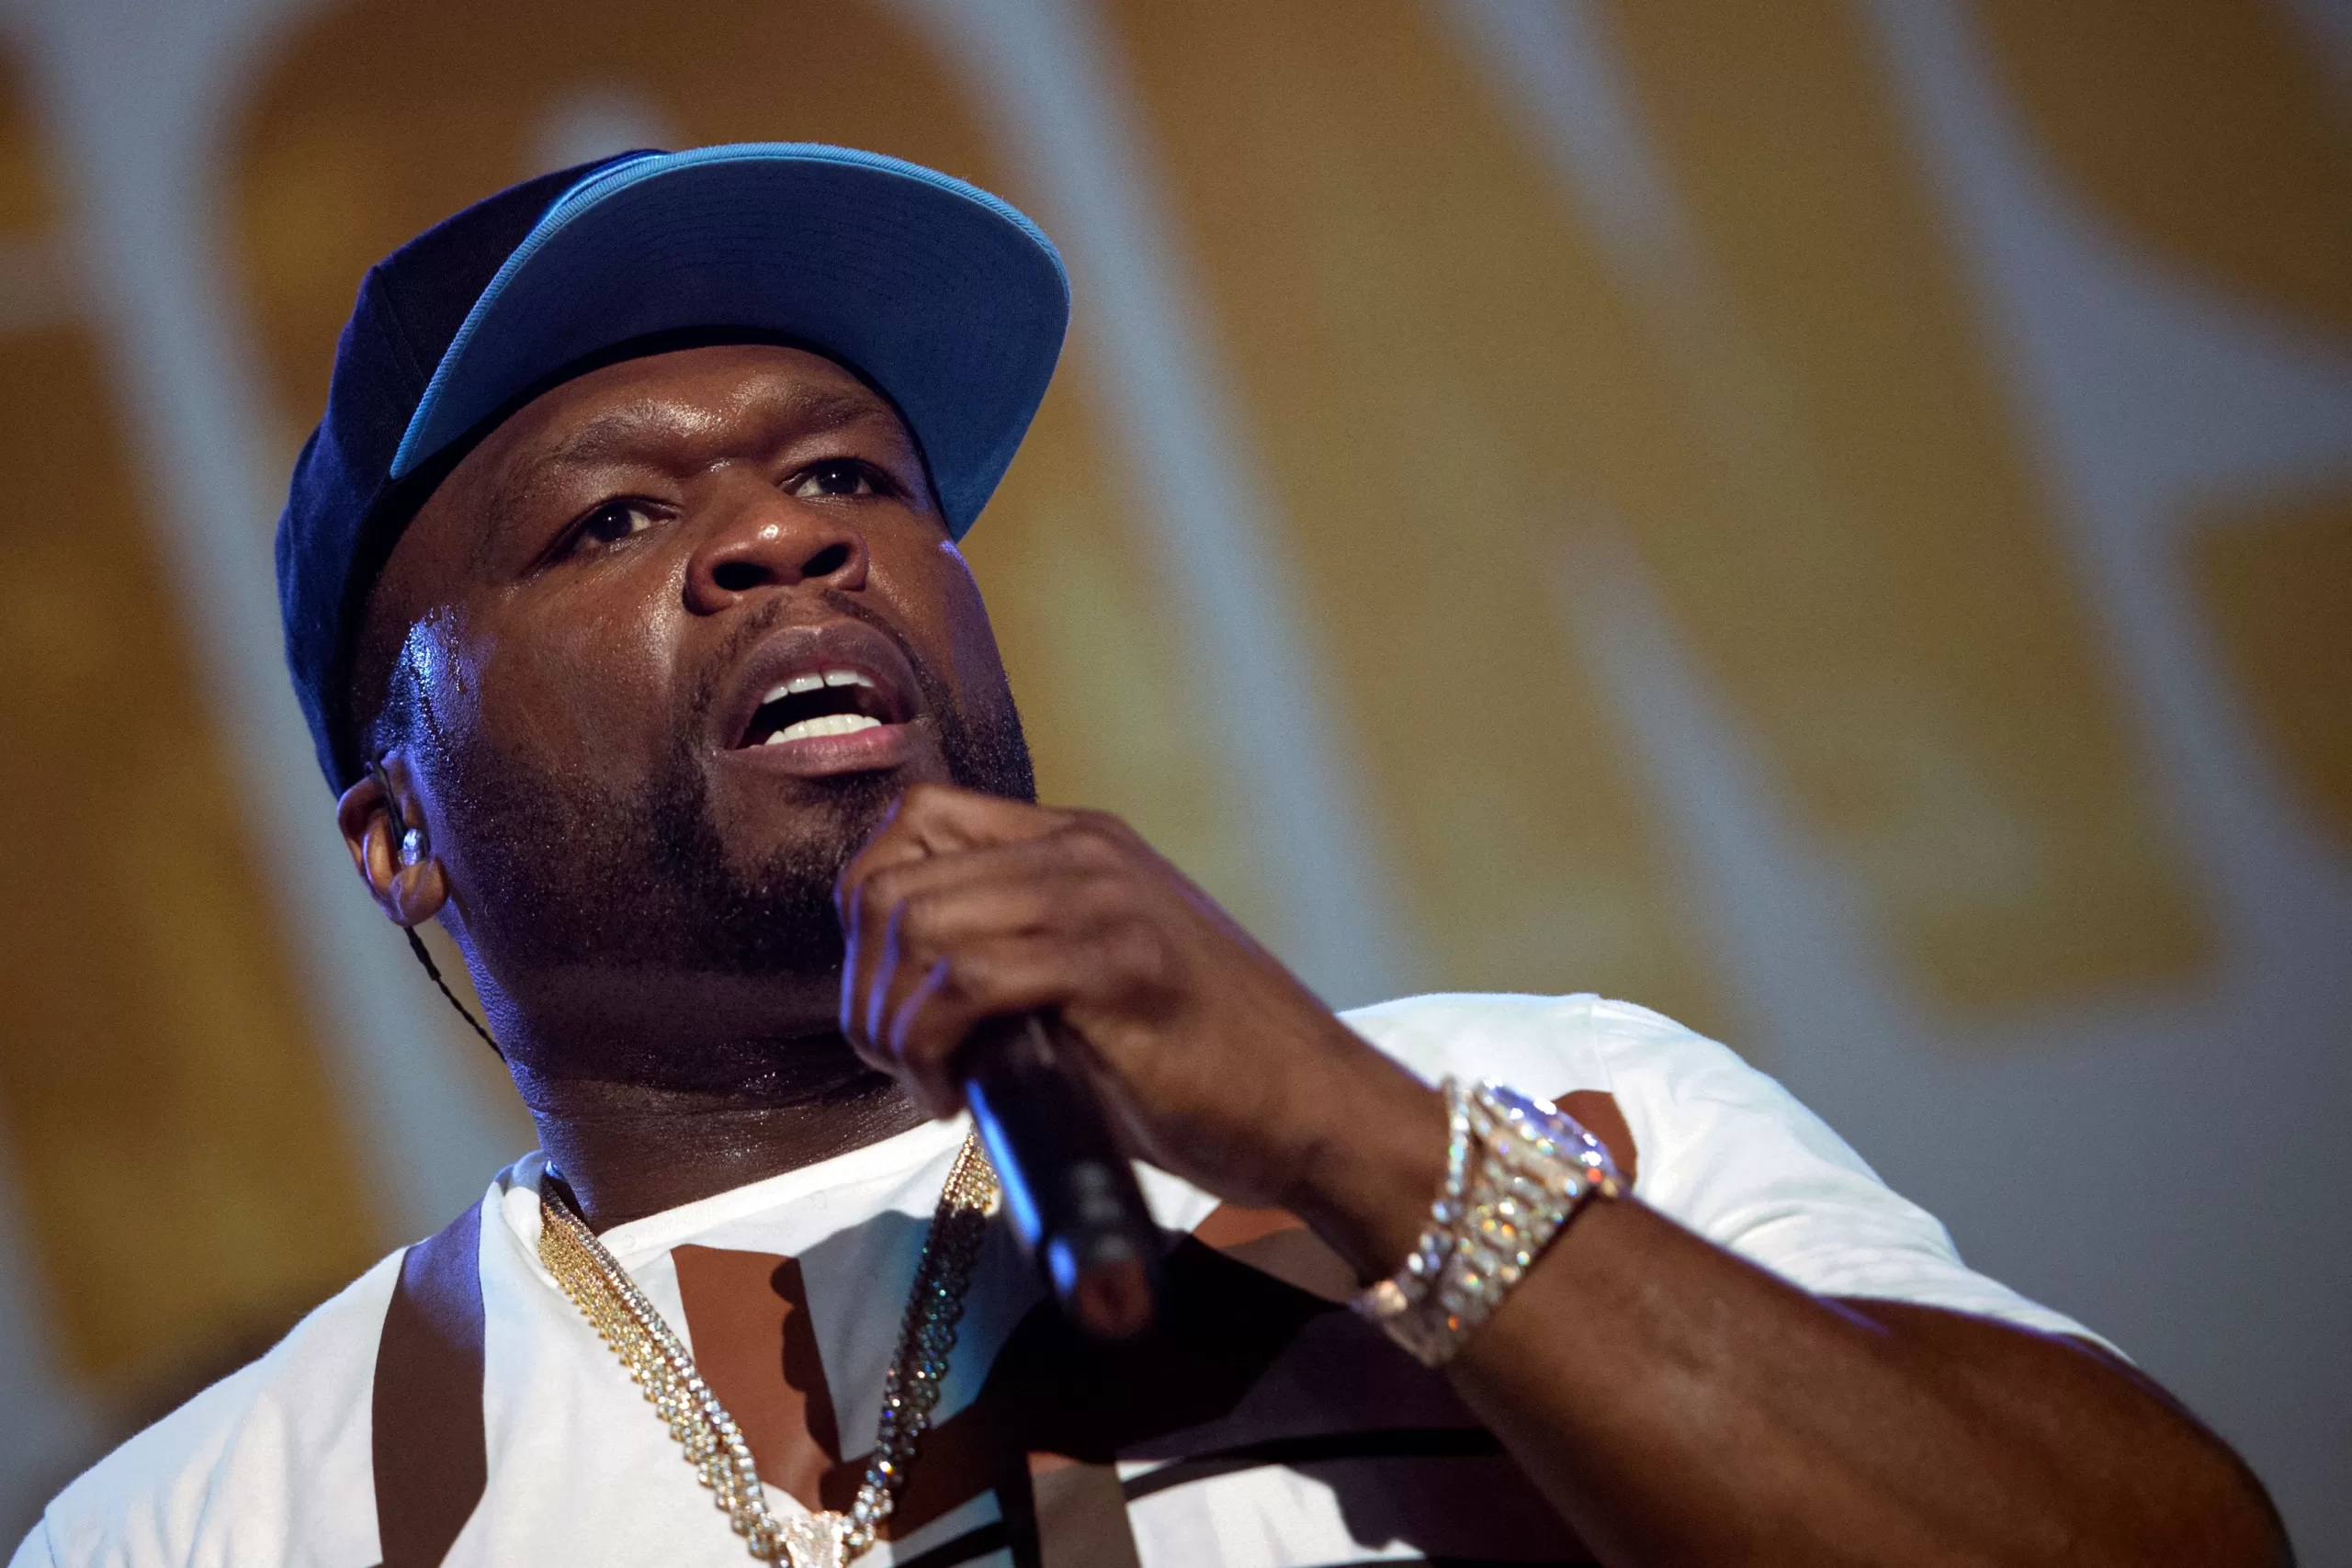 You are currently viewing 50 Cent gets angry and throws his microphone at a fan: He faces criminal investigation